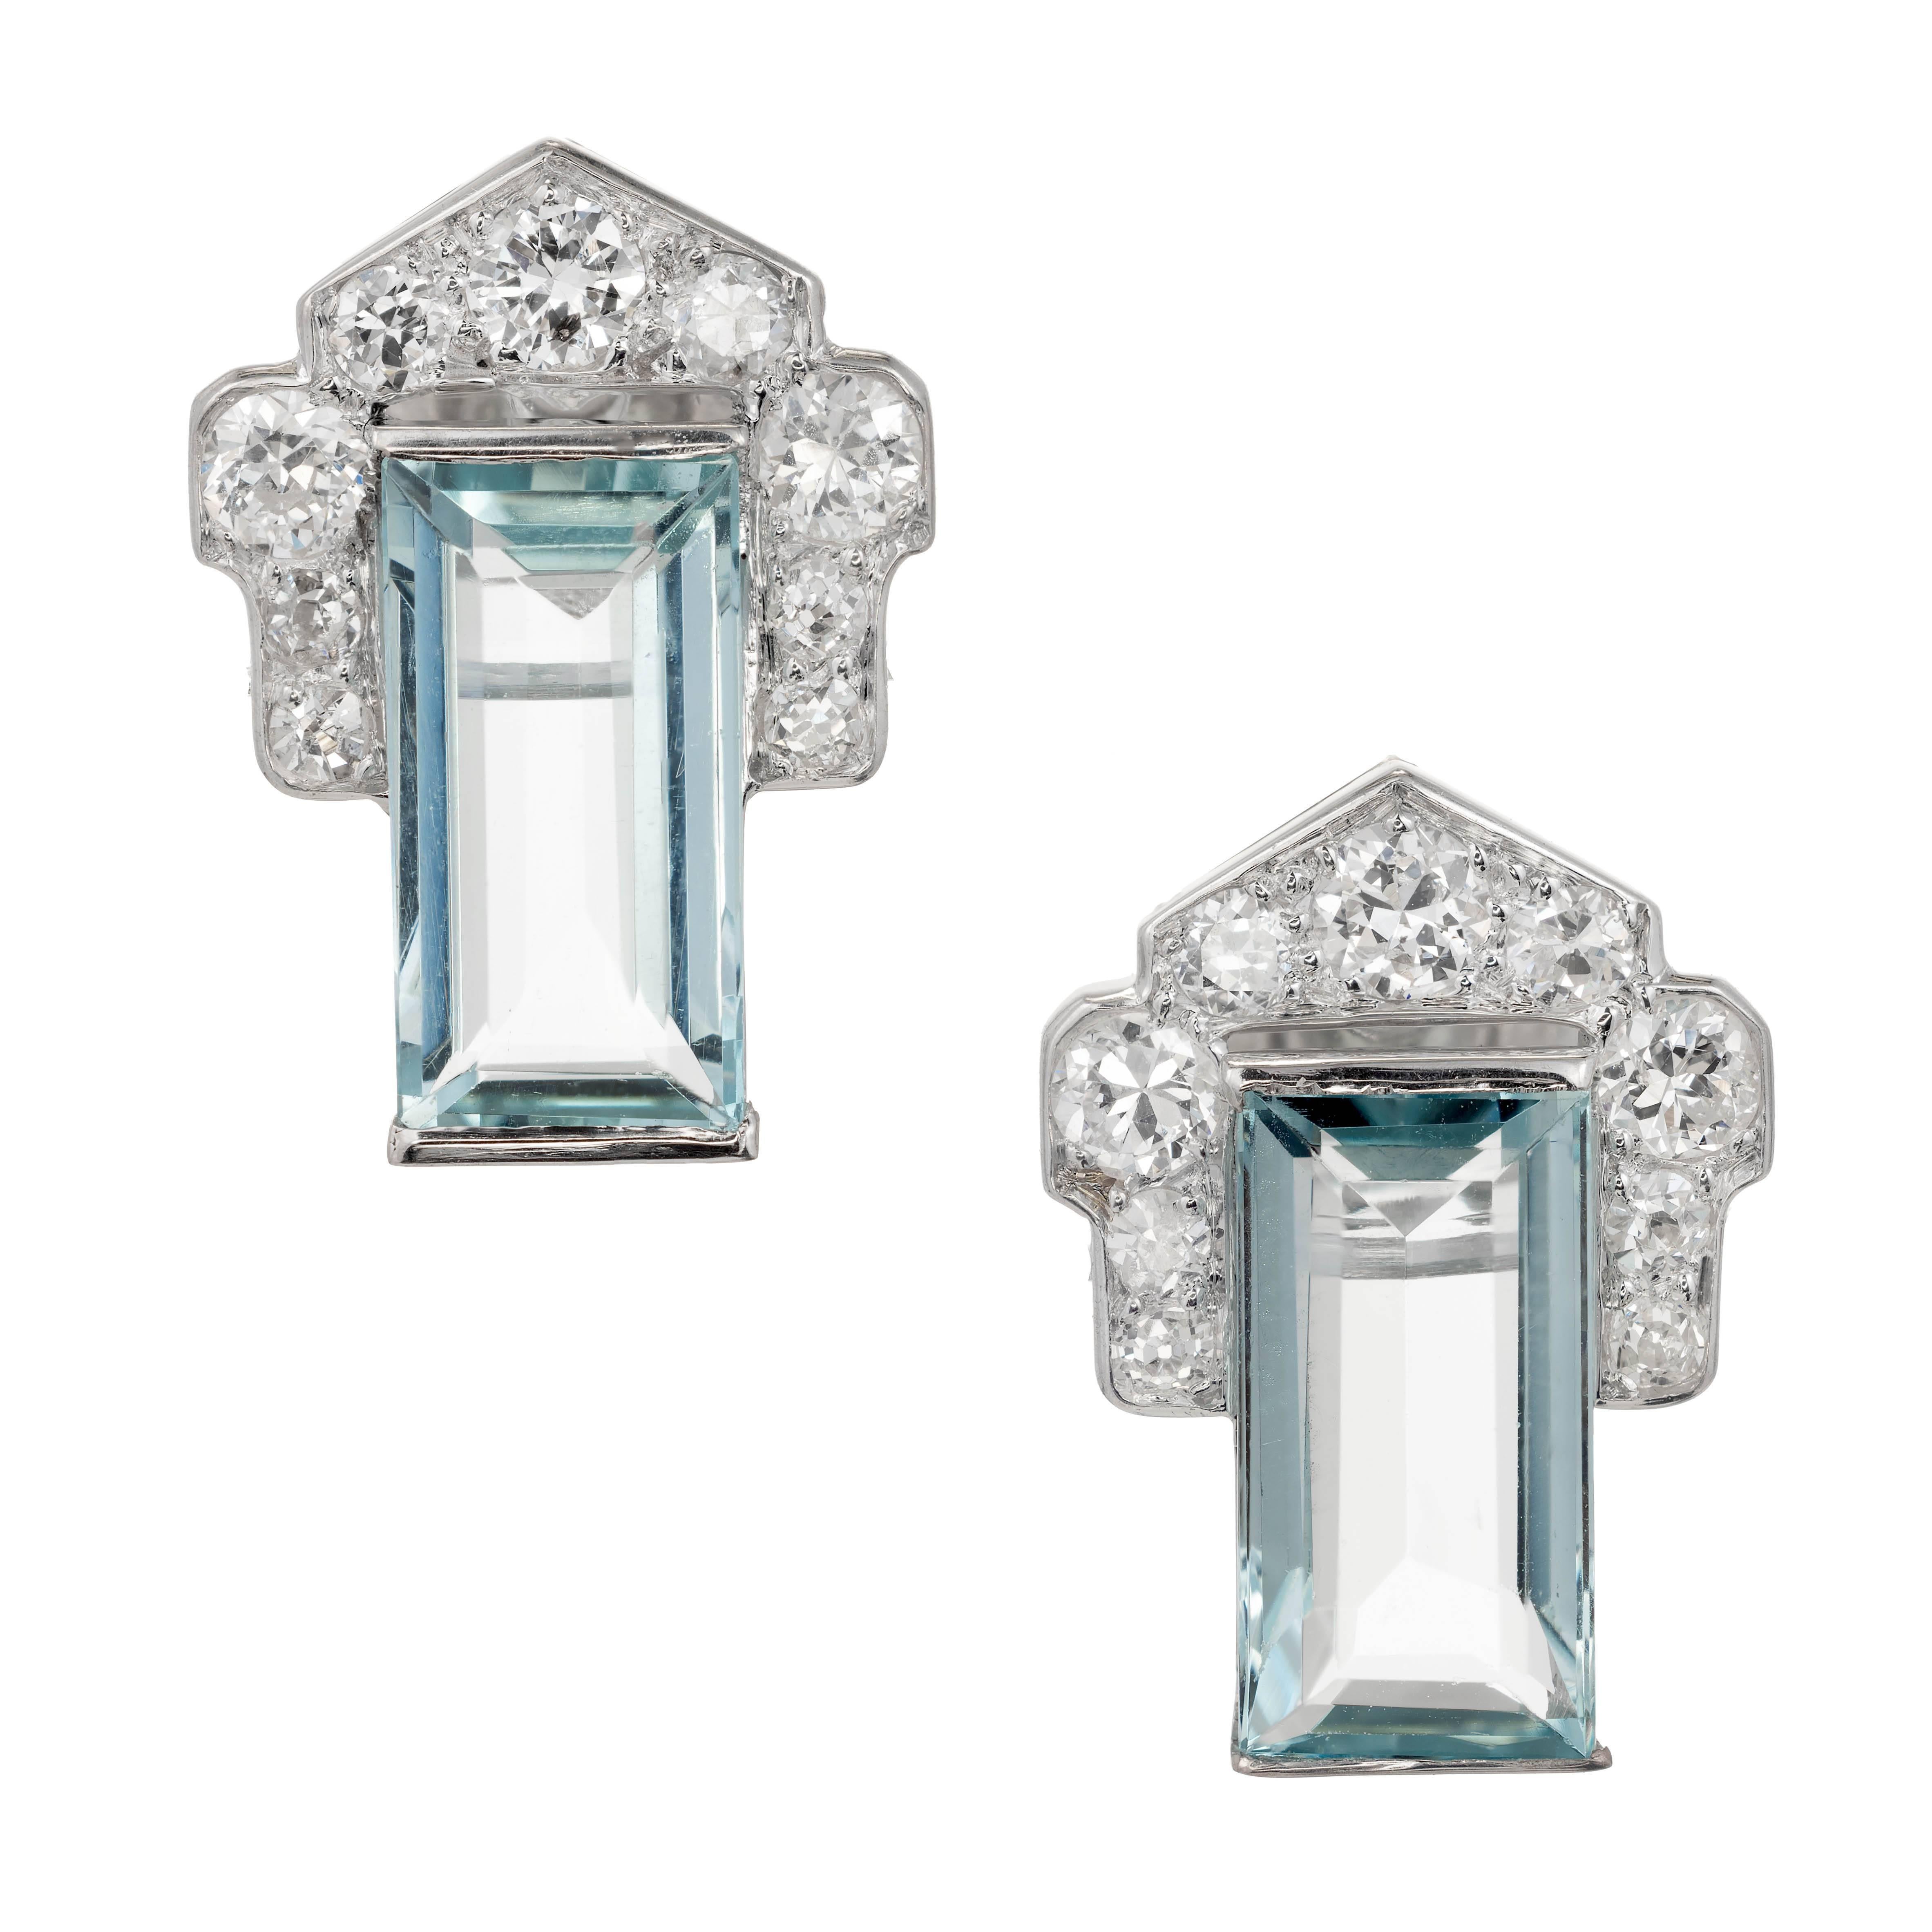 Art Deco Aquamarine and diamond cluster earrings. Rectangular step cut aquamarine encased on the top half by a flared diamond cluster. Group of varying sizes of pave set round diamonds in platinum. earrings

2 emerald cut aquamarine 10.80 x 5.64 x